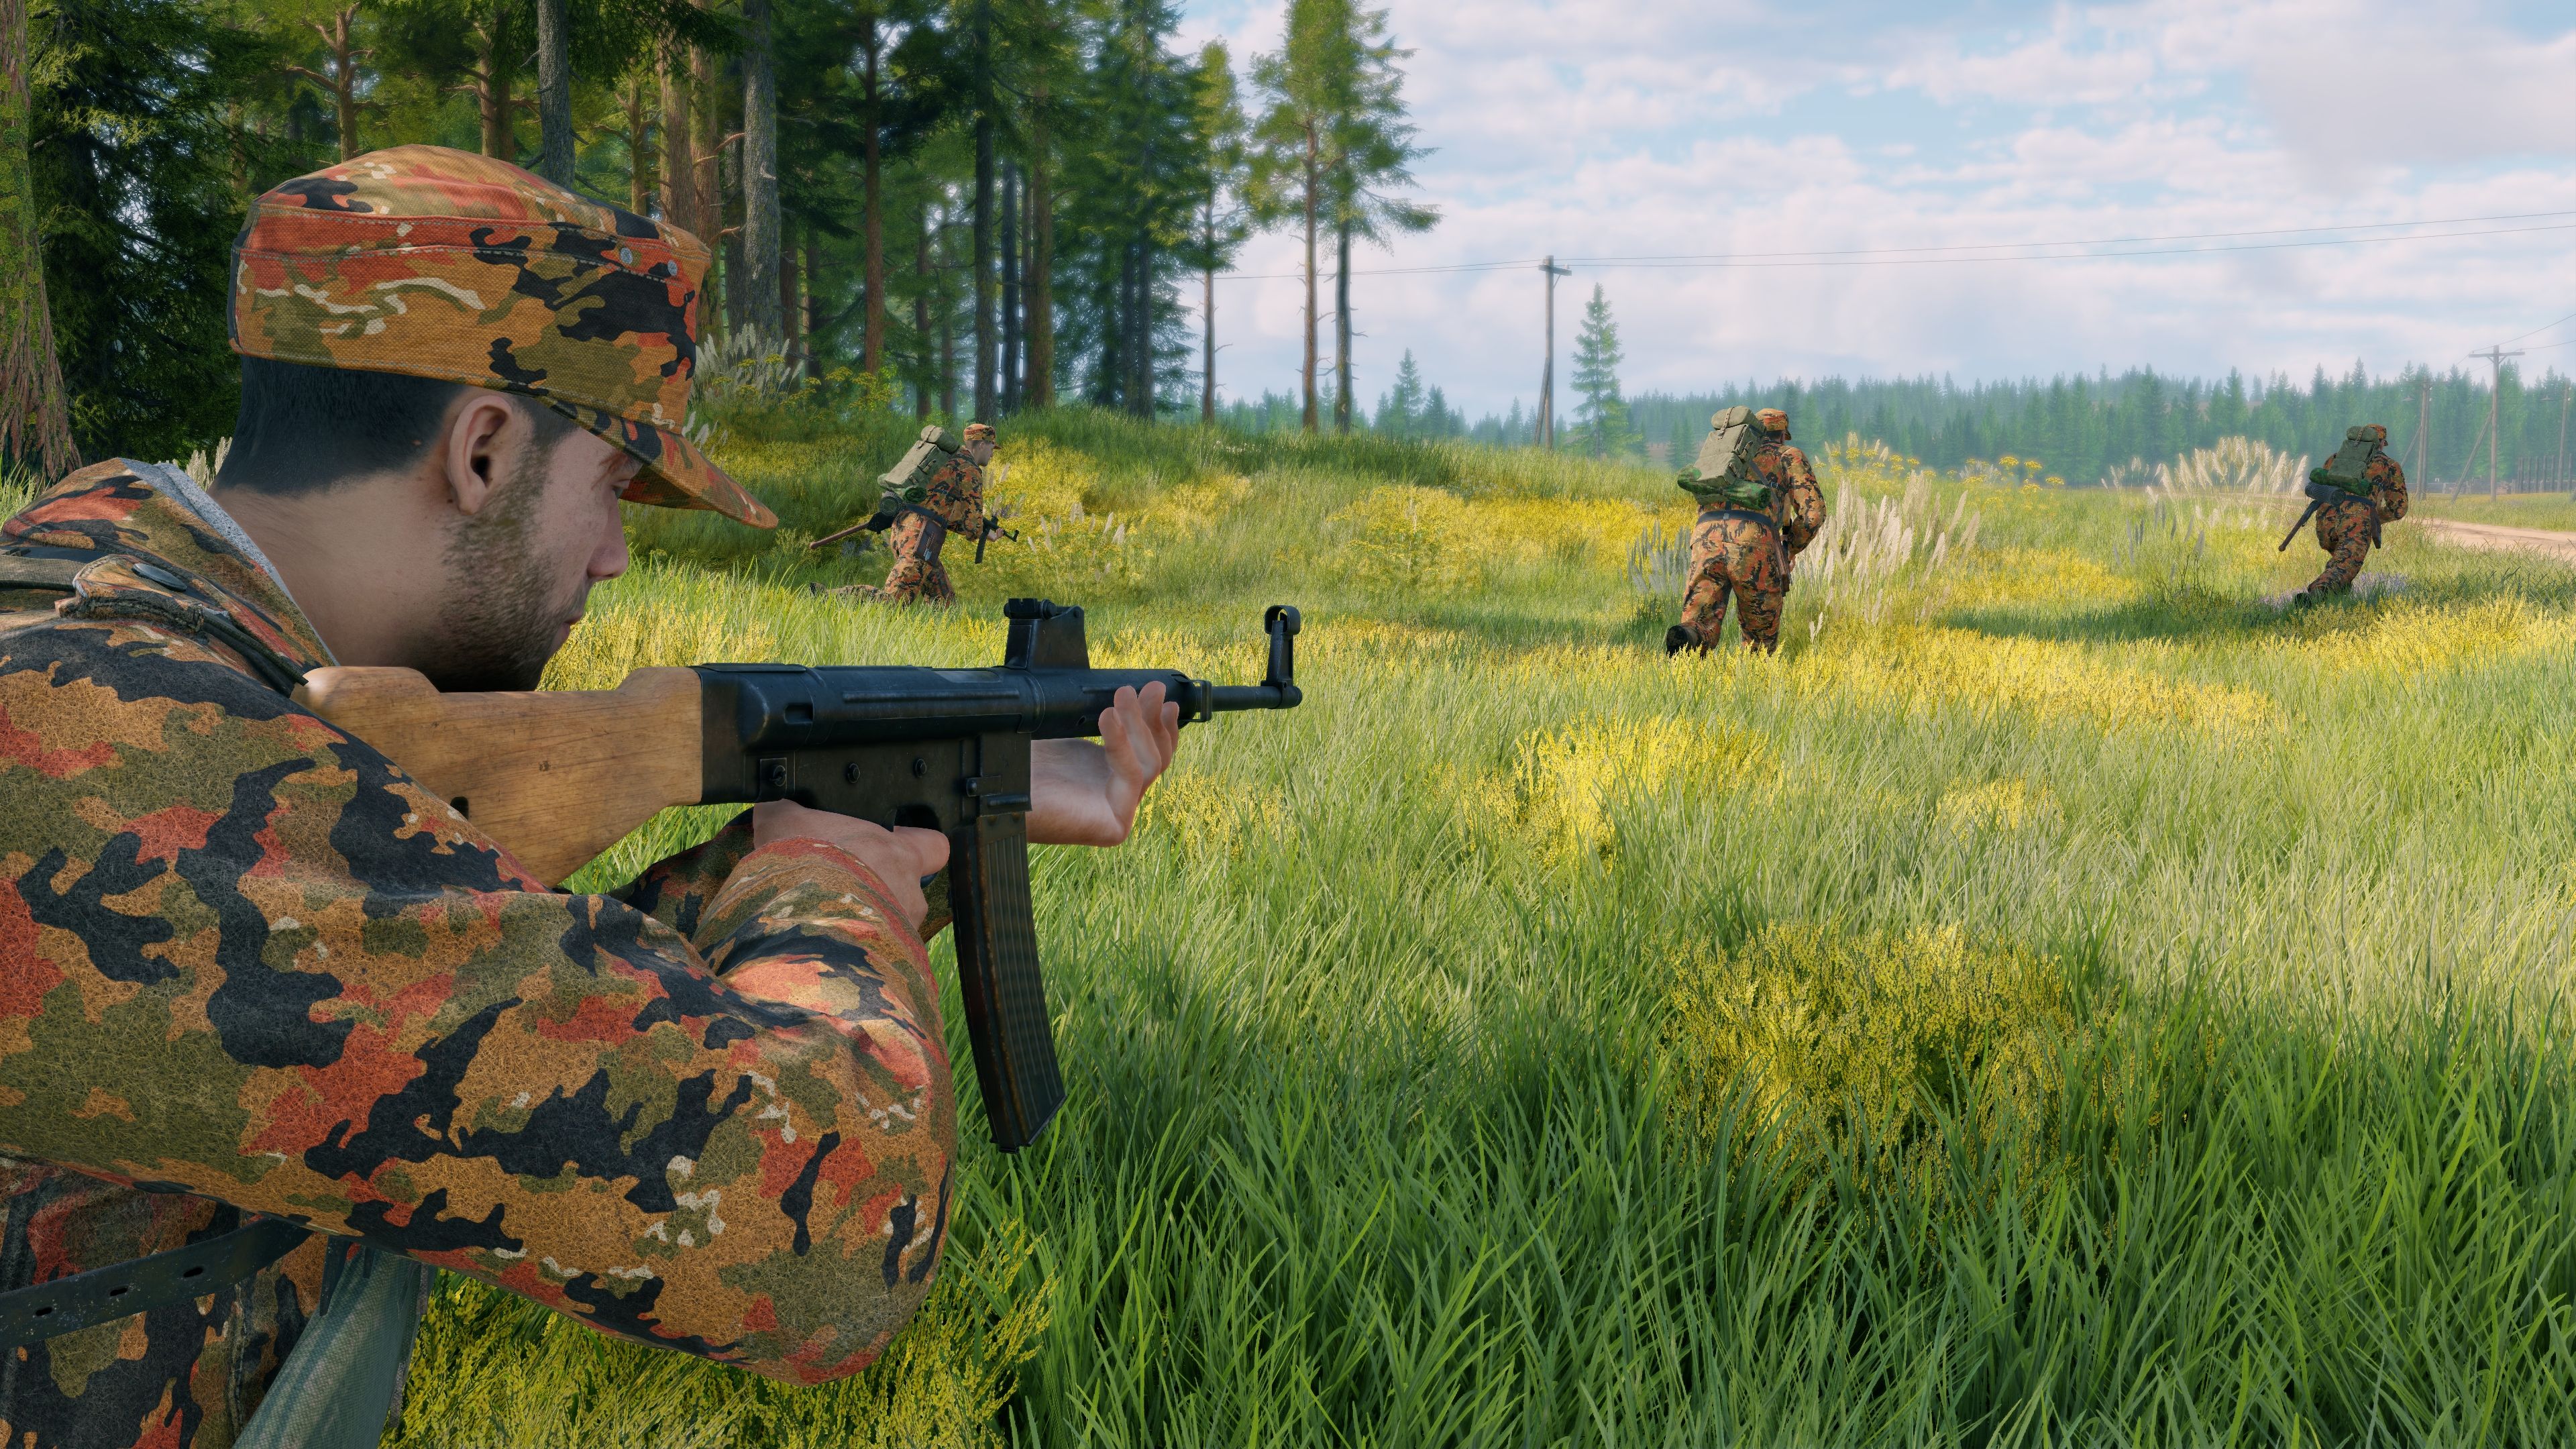 Enlisted — Stg 45(M) Squad on PS4 PS5 — price history, screenshots